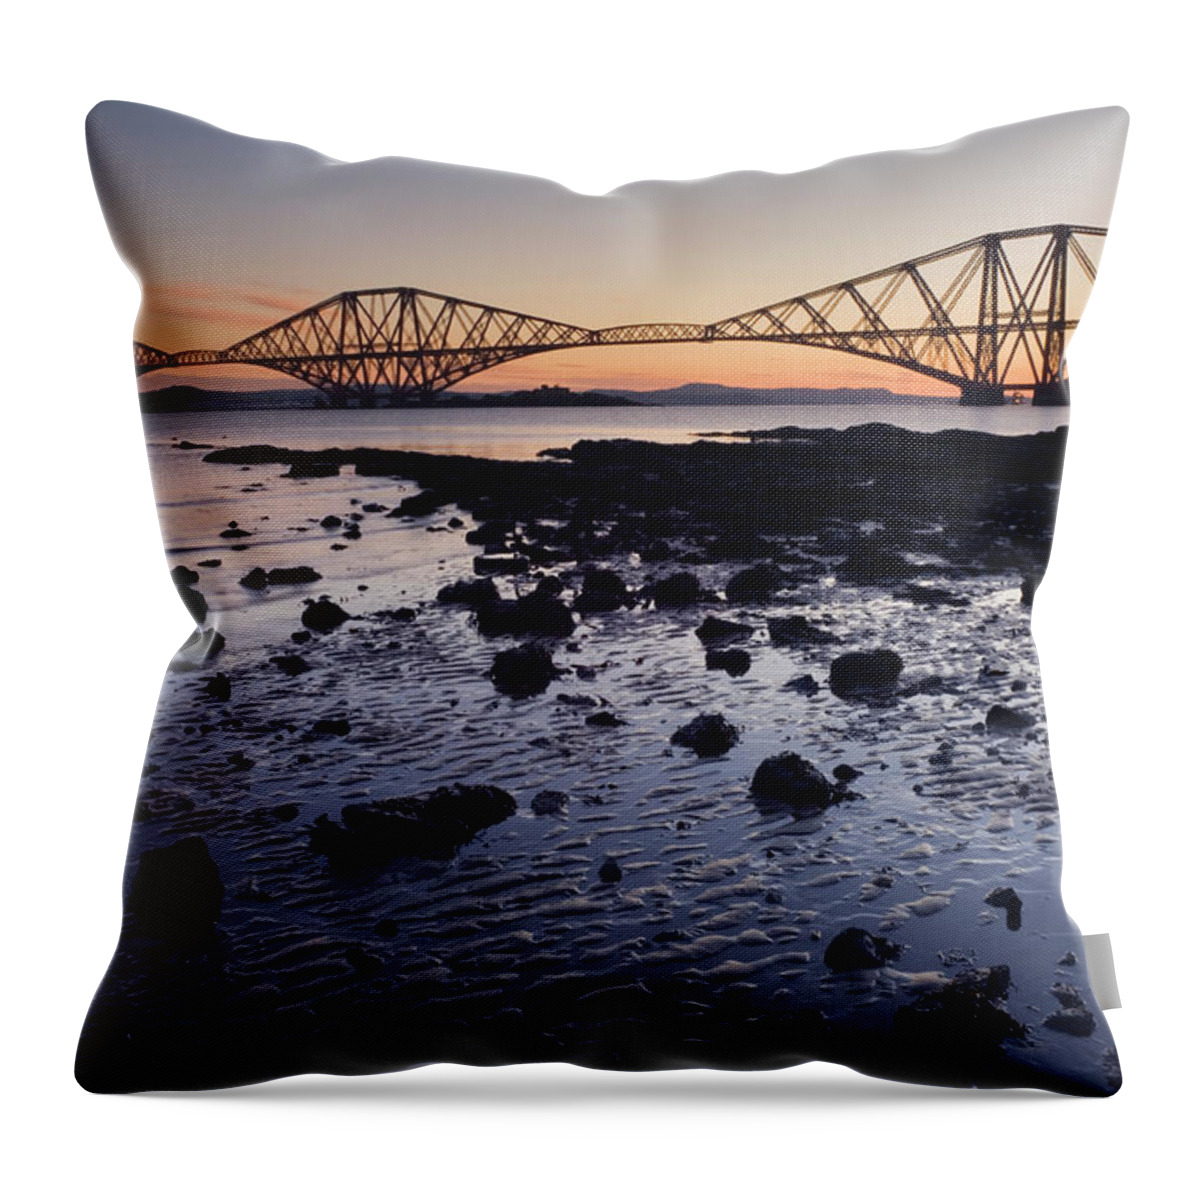 Cantilever Bridge Throw Pillow featuring the photograph The Forth Rail Bridge At Dawn by Northlightimages